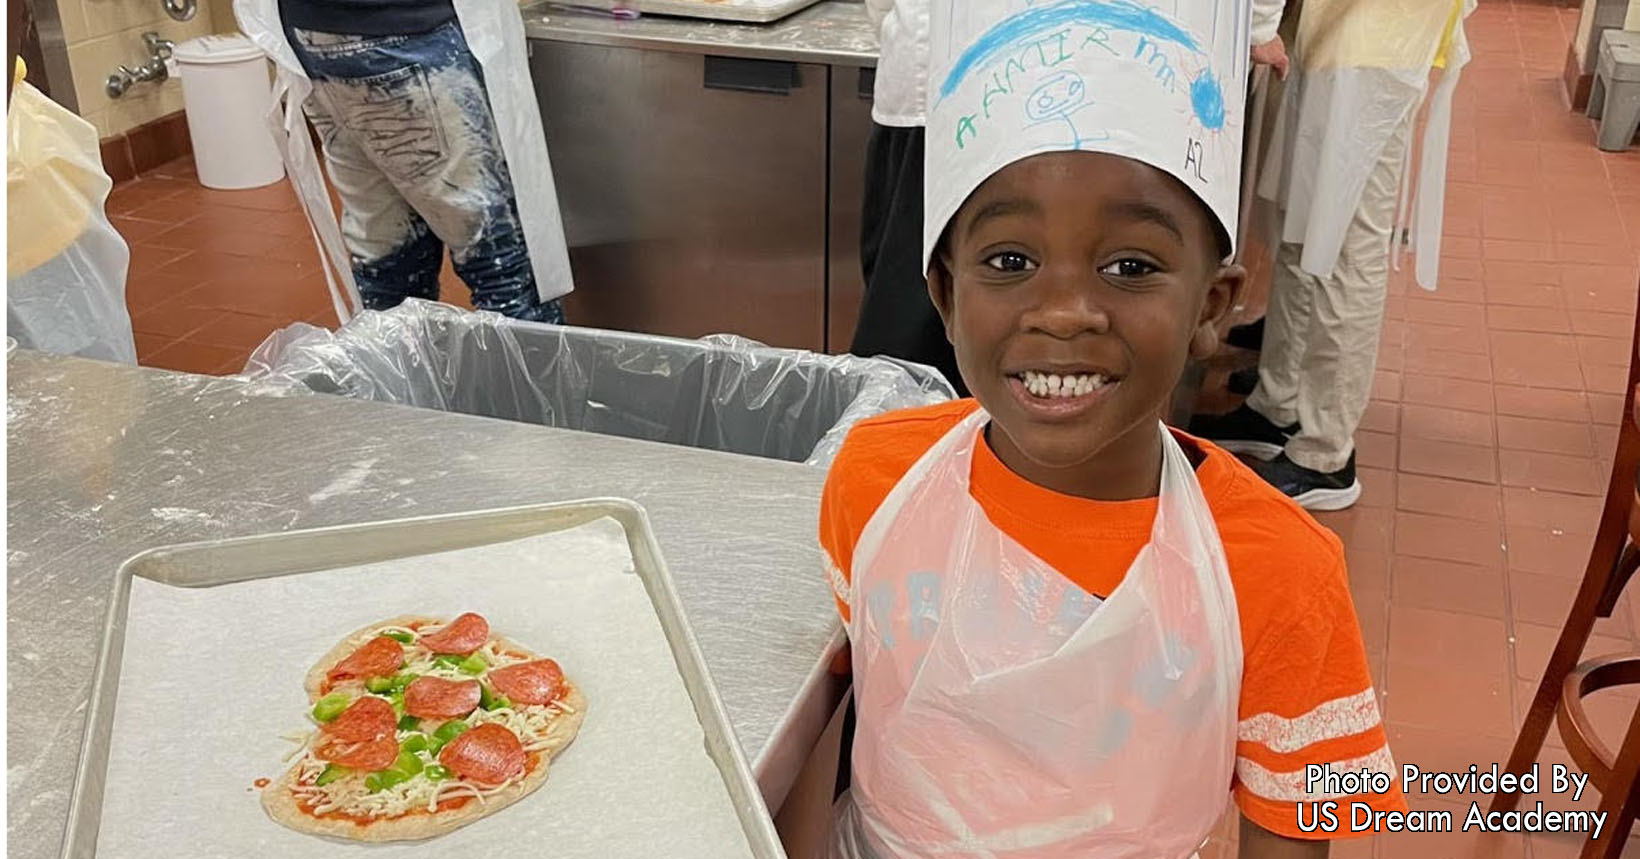 A young student learns culinary skills making his own pizza.